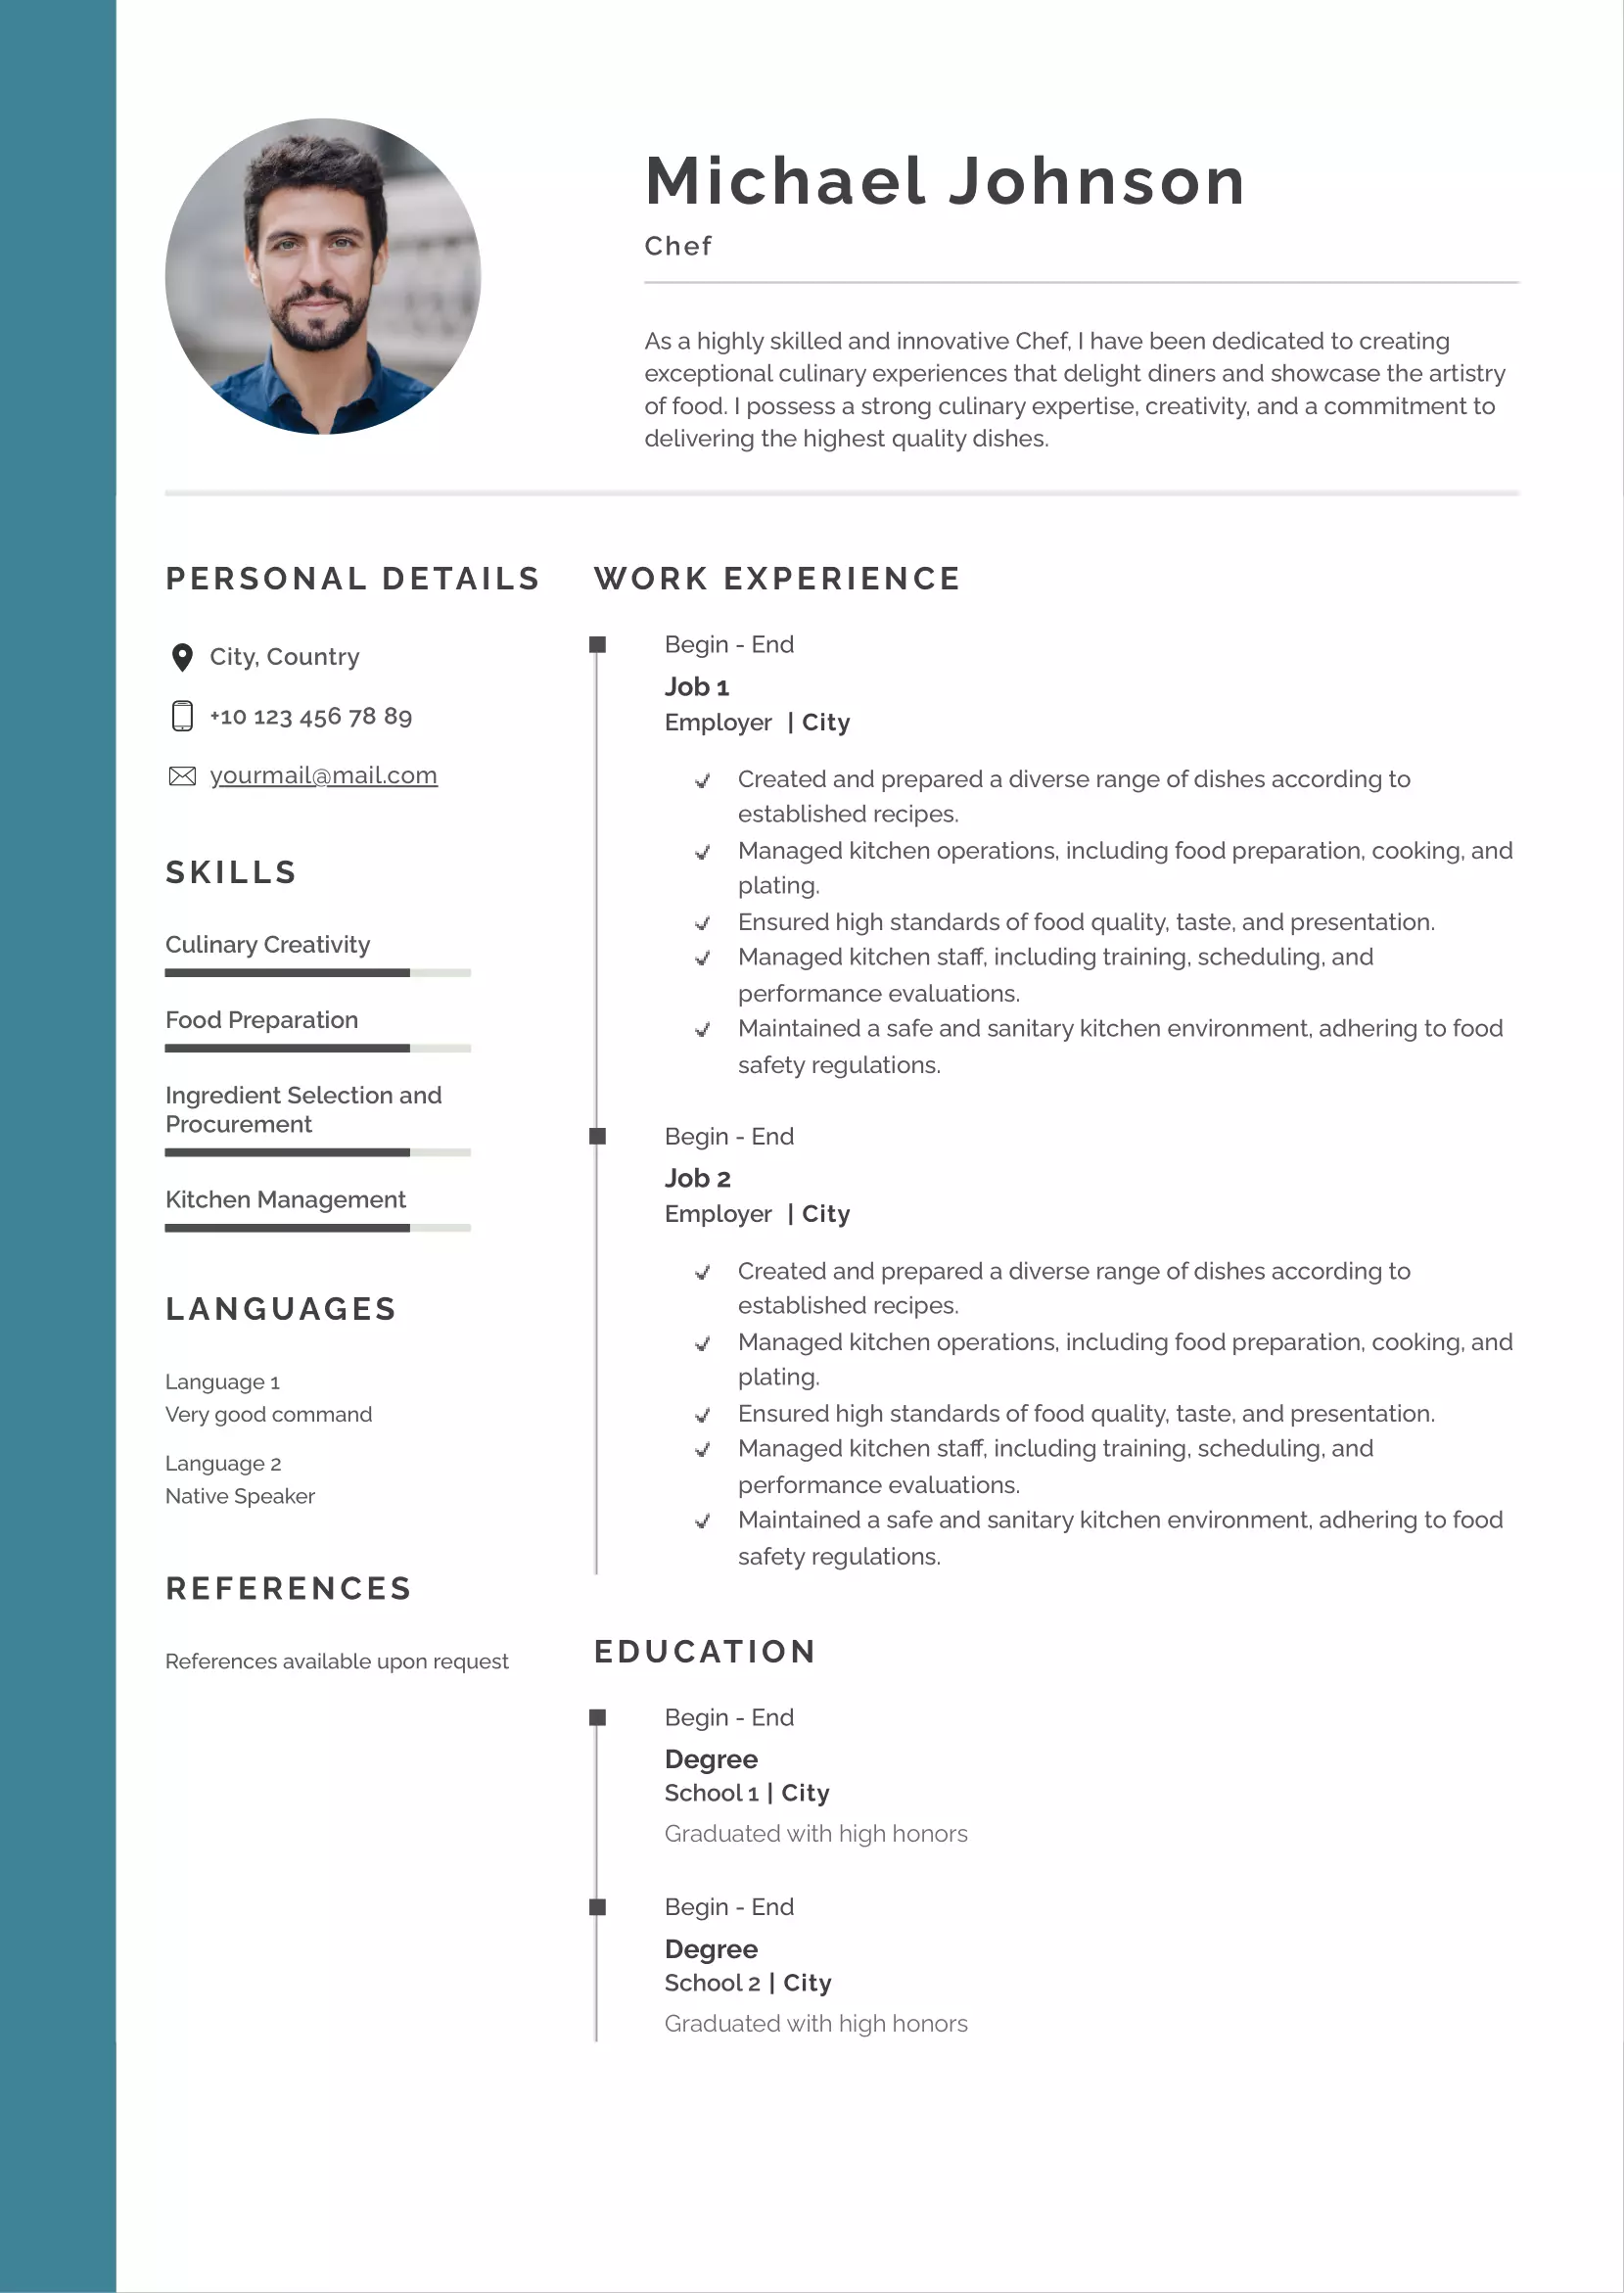 Chef resume CV examples